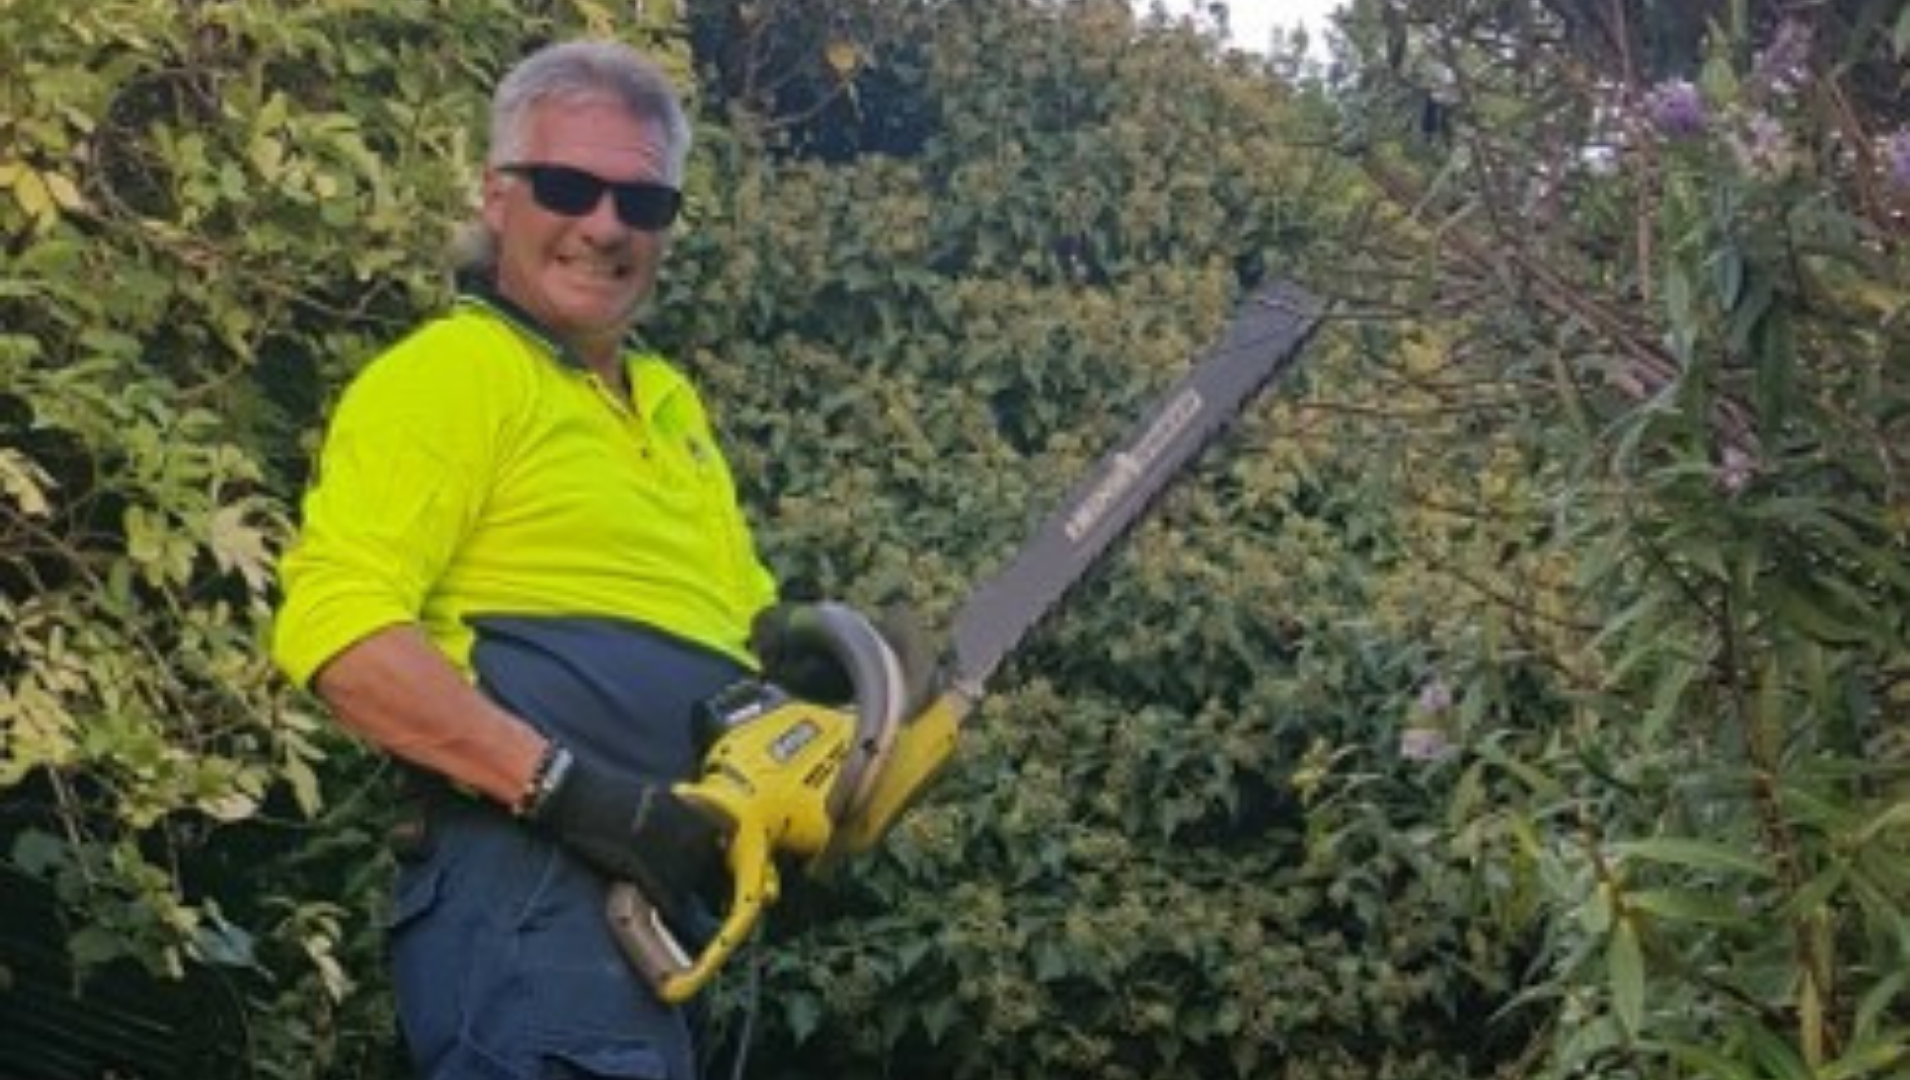 Wayne is pictures tanding in front of an overgrown tree, in his hi-vis work uniform and PPE, holding a chainsaw and smiling